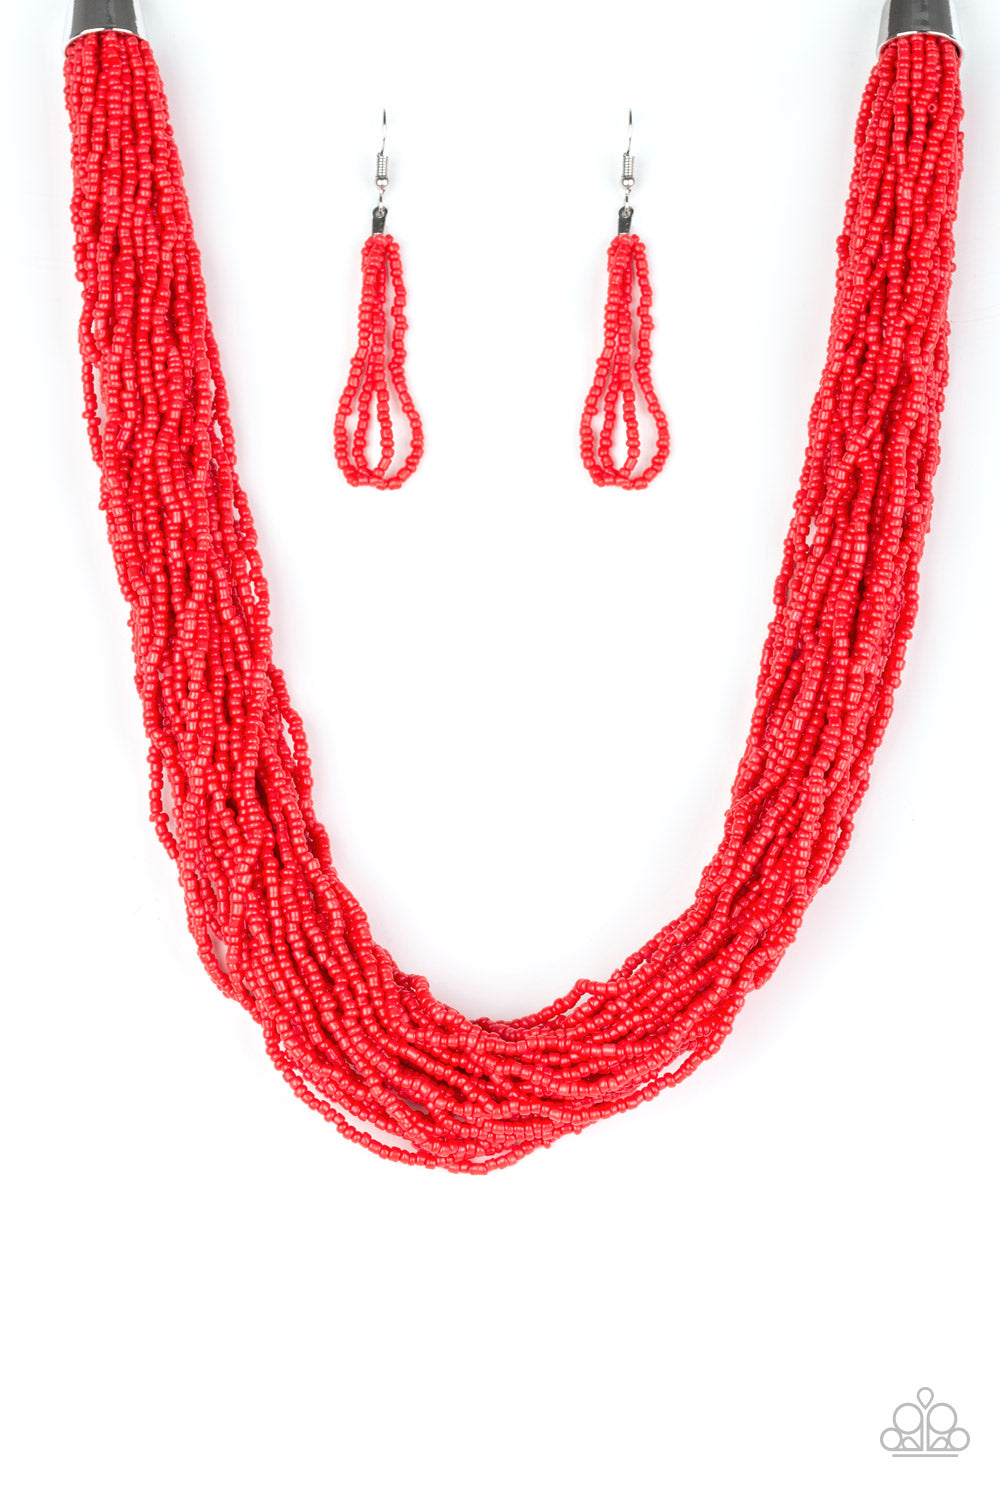 The Show Must CONGO On! - Red Seed Bead Necklace - Paparazzi Accessories